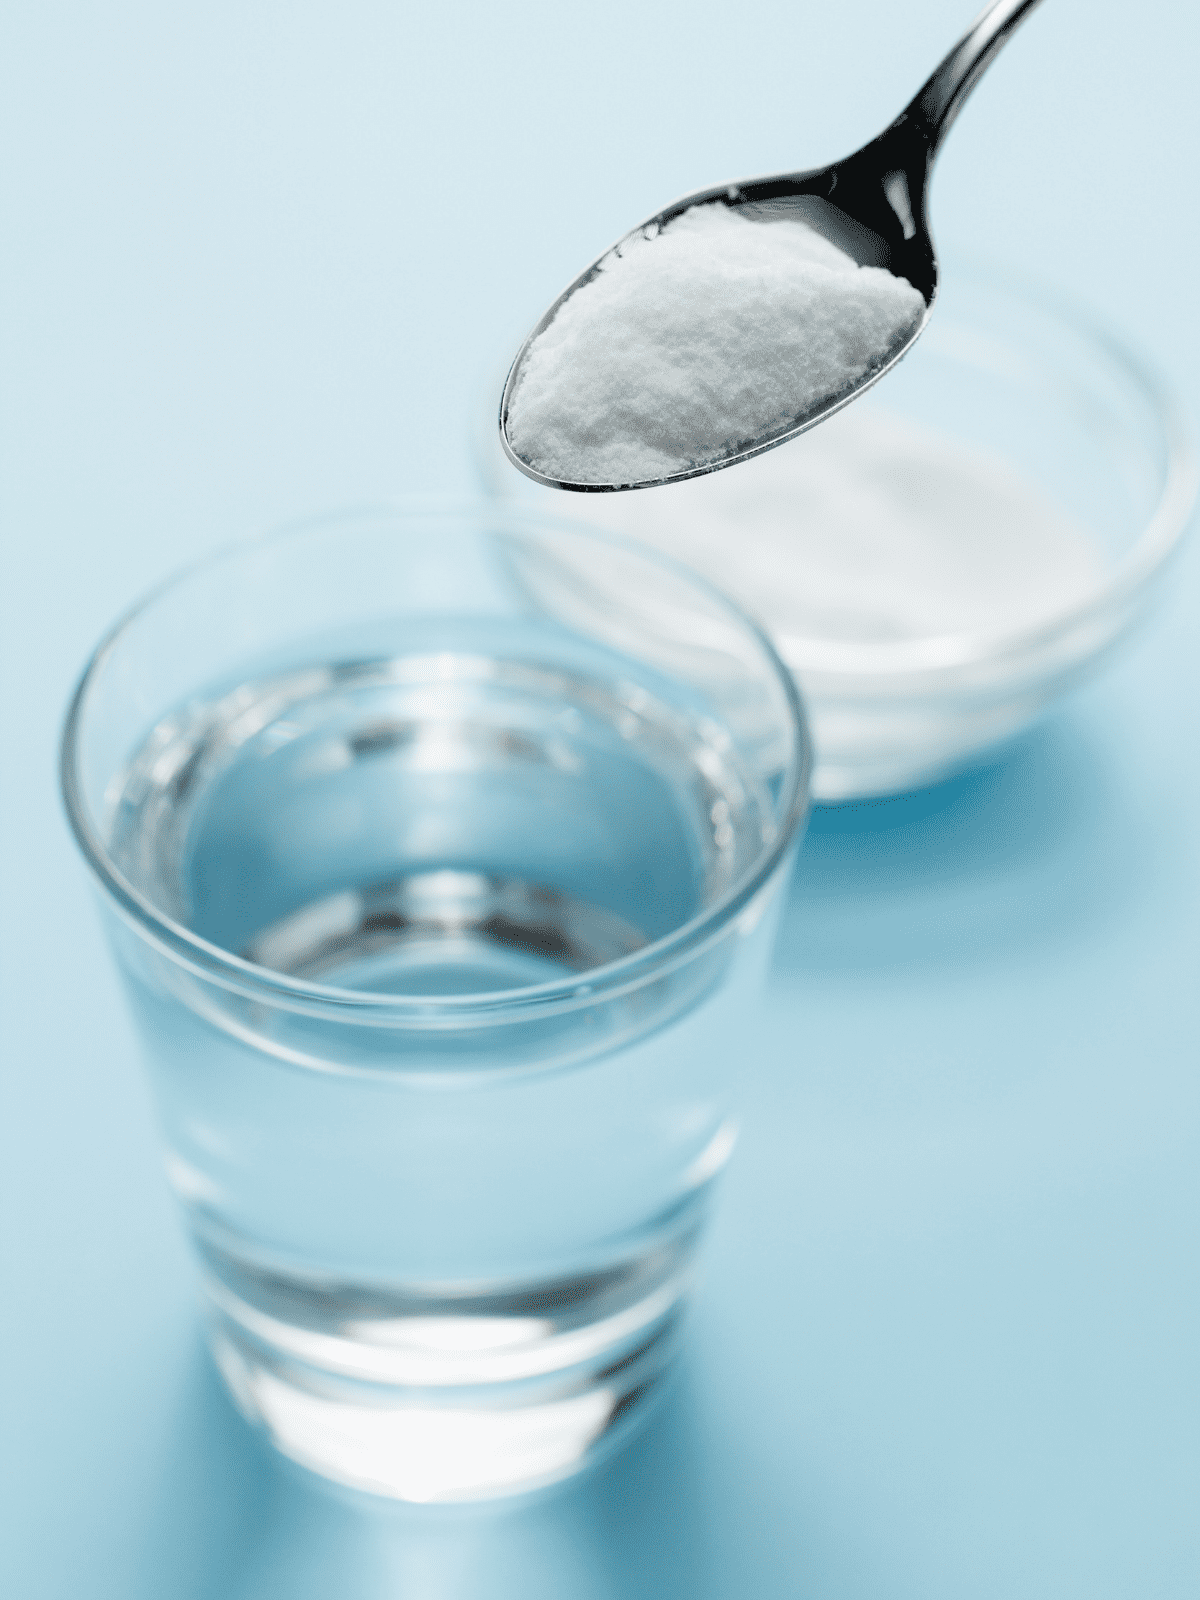 A glass of water next to a small bowl of baking powder or soda. 